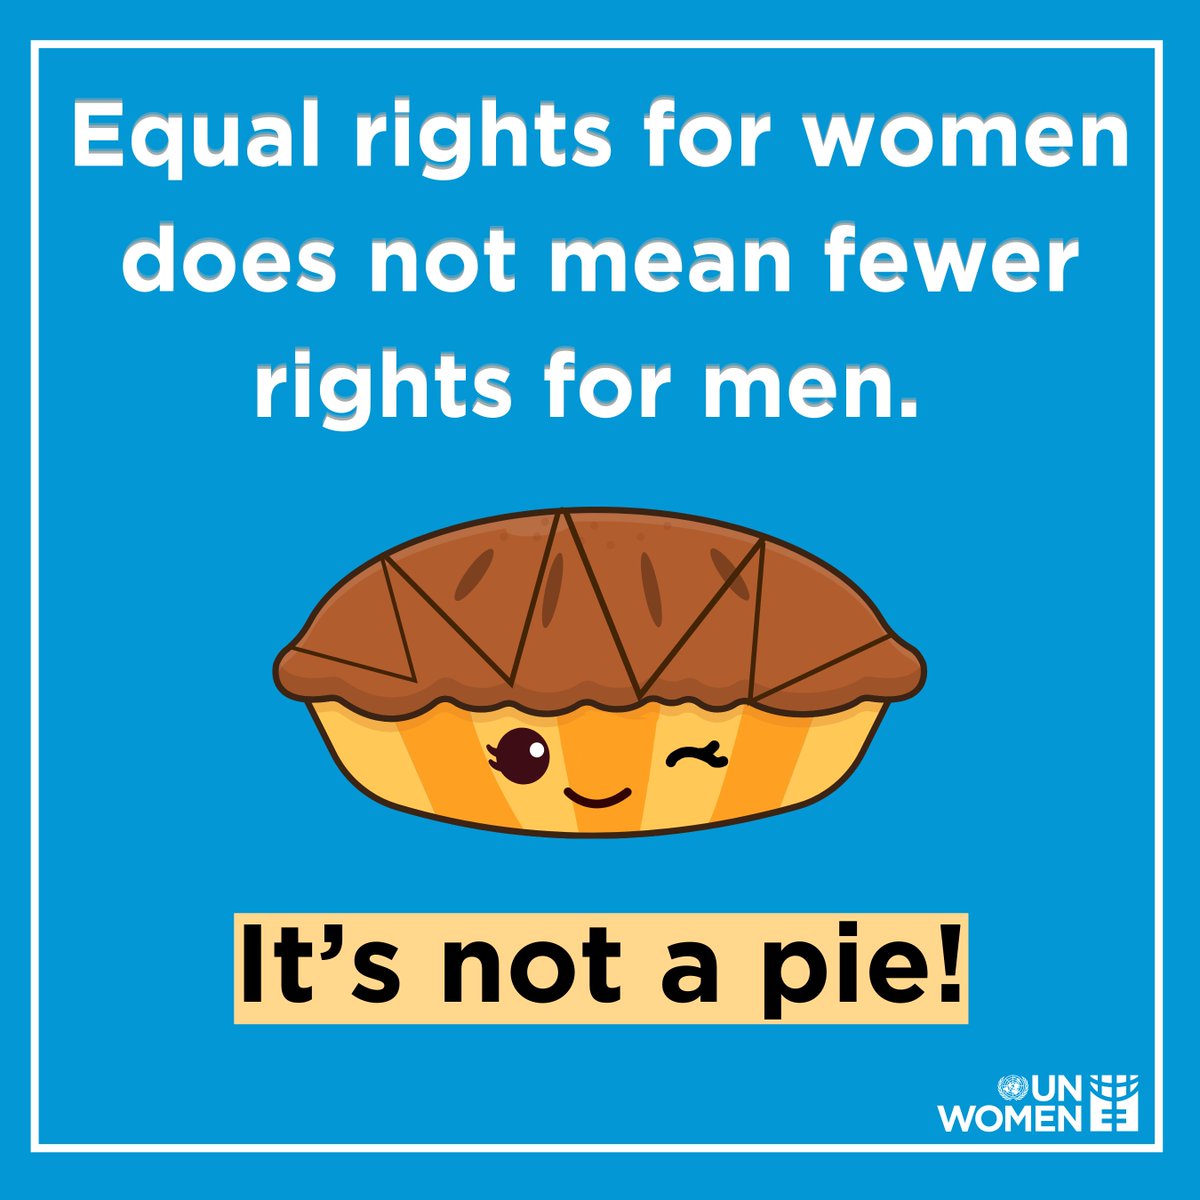 Equal rights for women does not mean fewer rights for men. ❌ It’s not a pie! 🥧 We ALL deserve to have equal rights. RT if you agree!